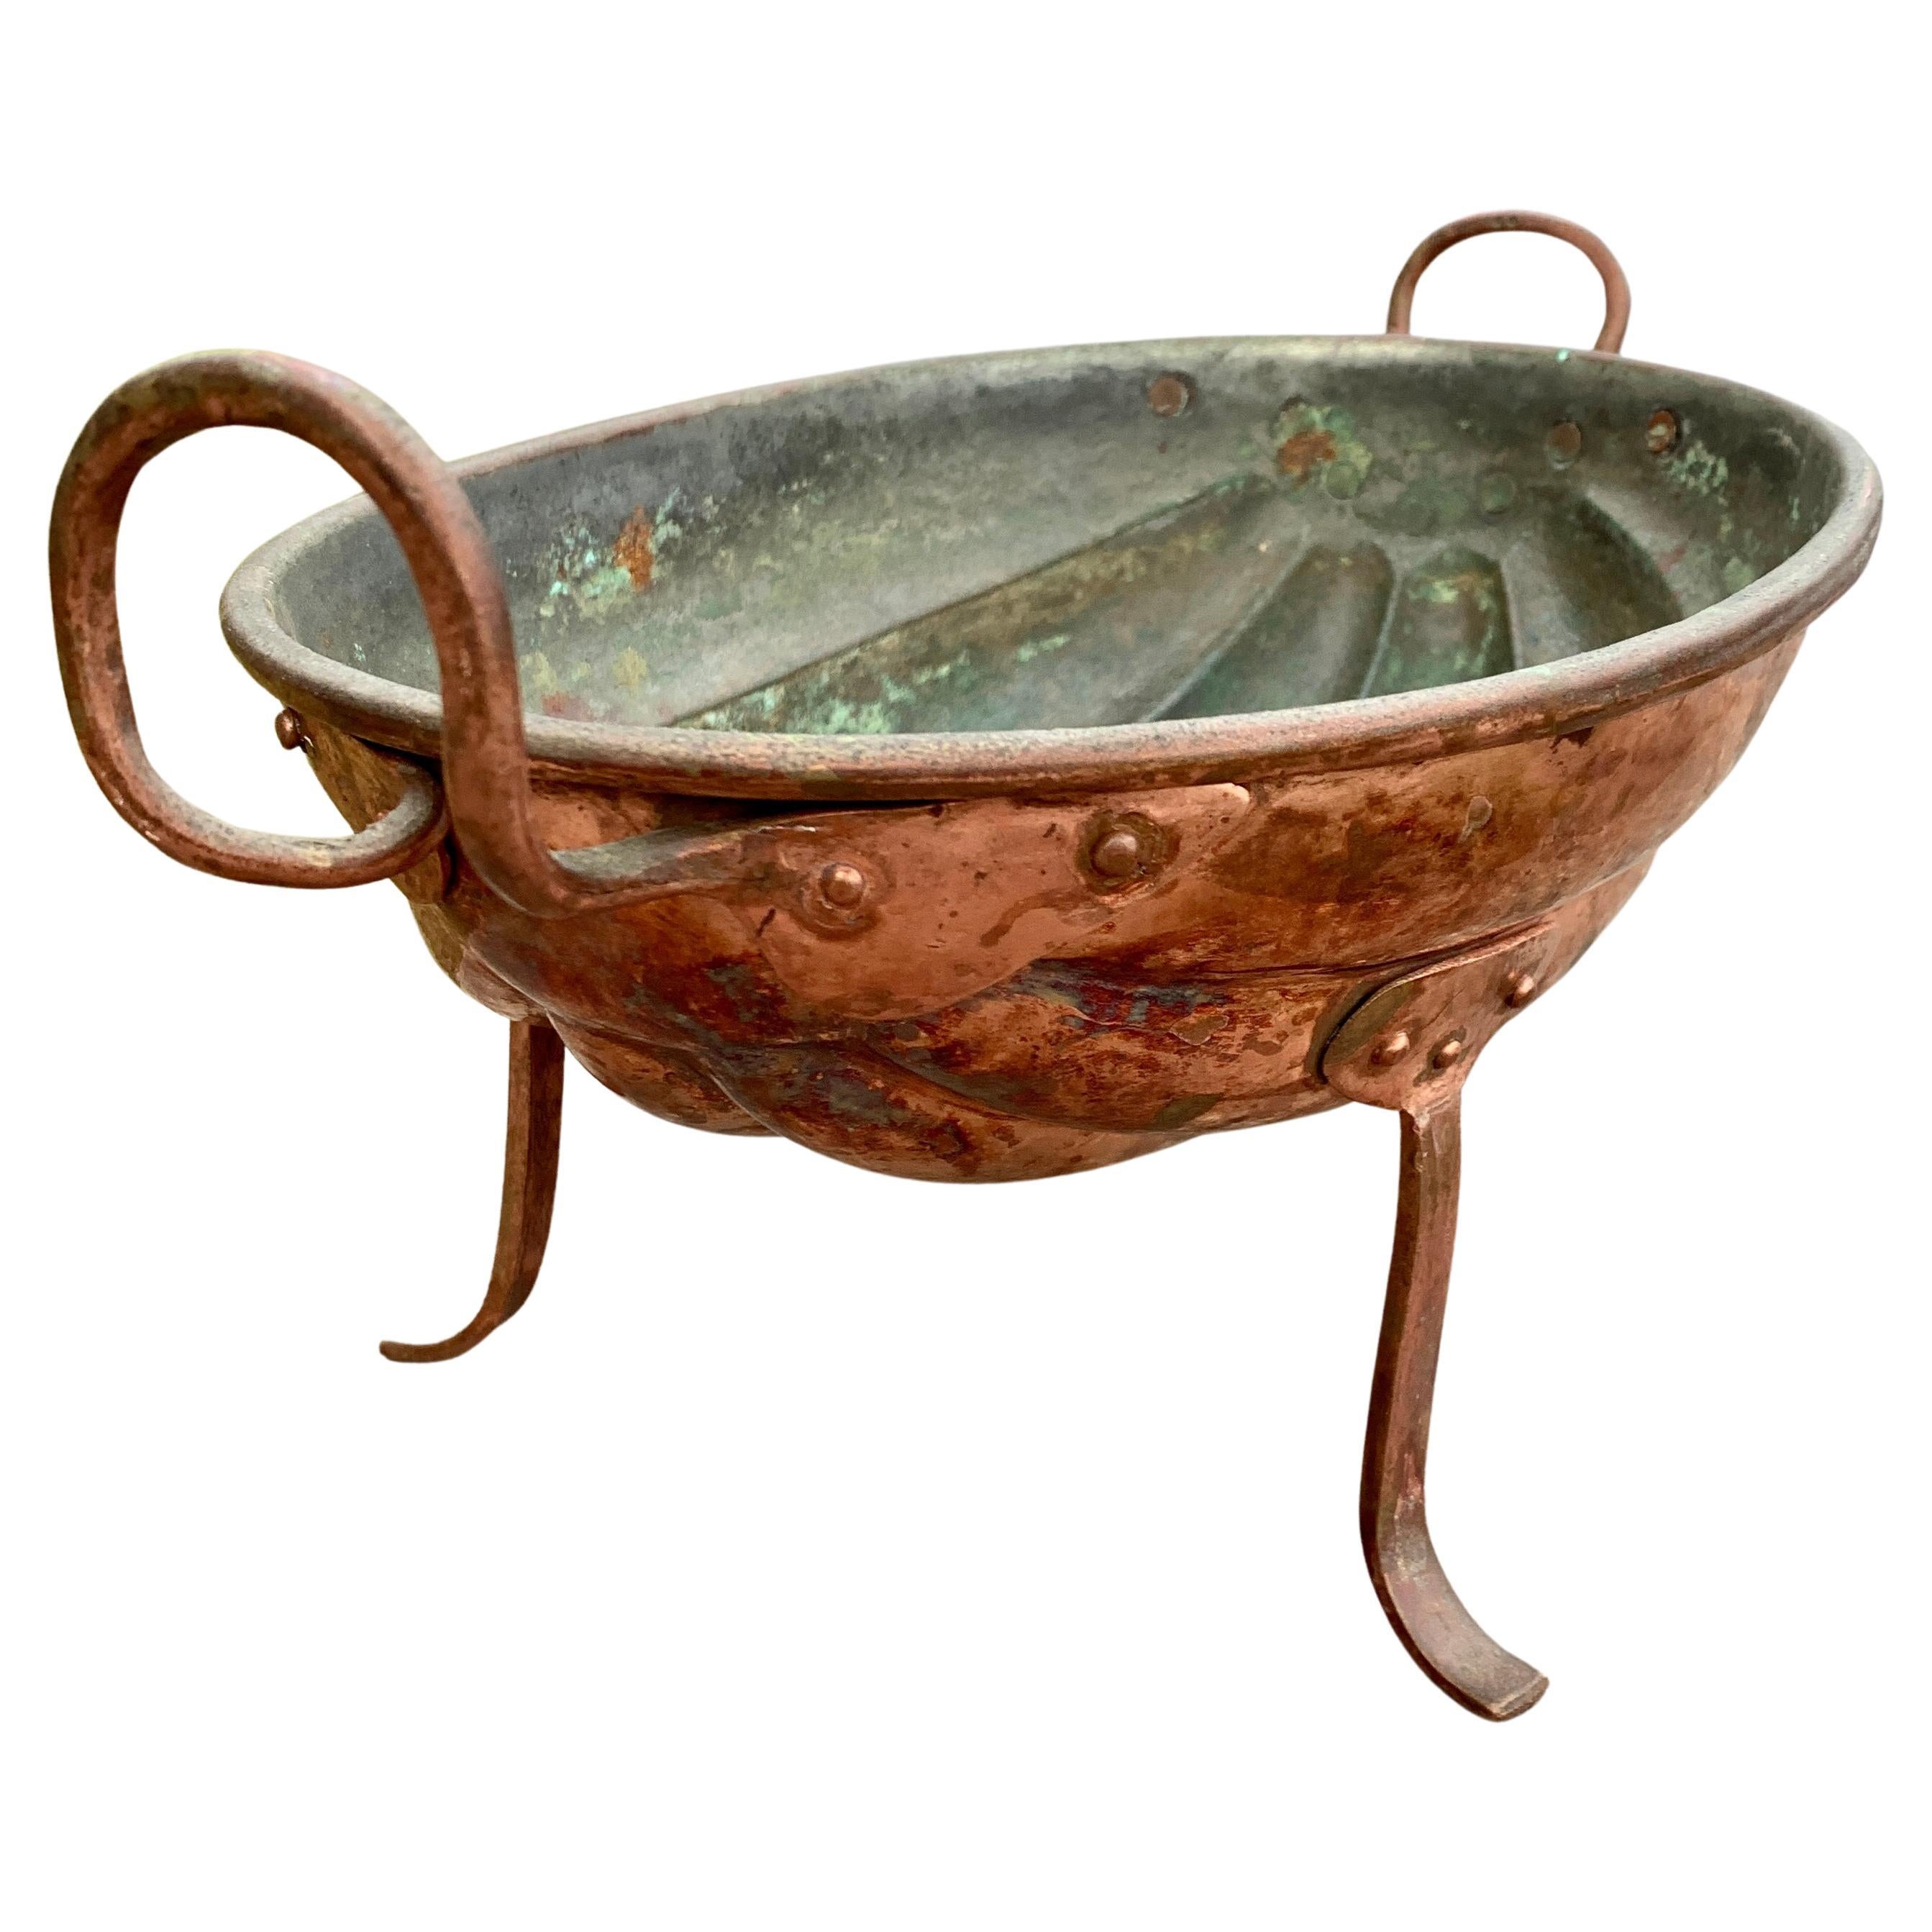 An early 19th century Danish hand hammered copper mold for wall decoration in a kitchen or a dining room. It can also be used as a bowl standing stable on its legs. 
The mold has only been lightly polished in order to keep the original old patina.